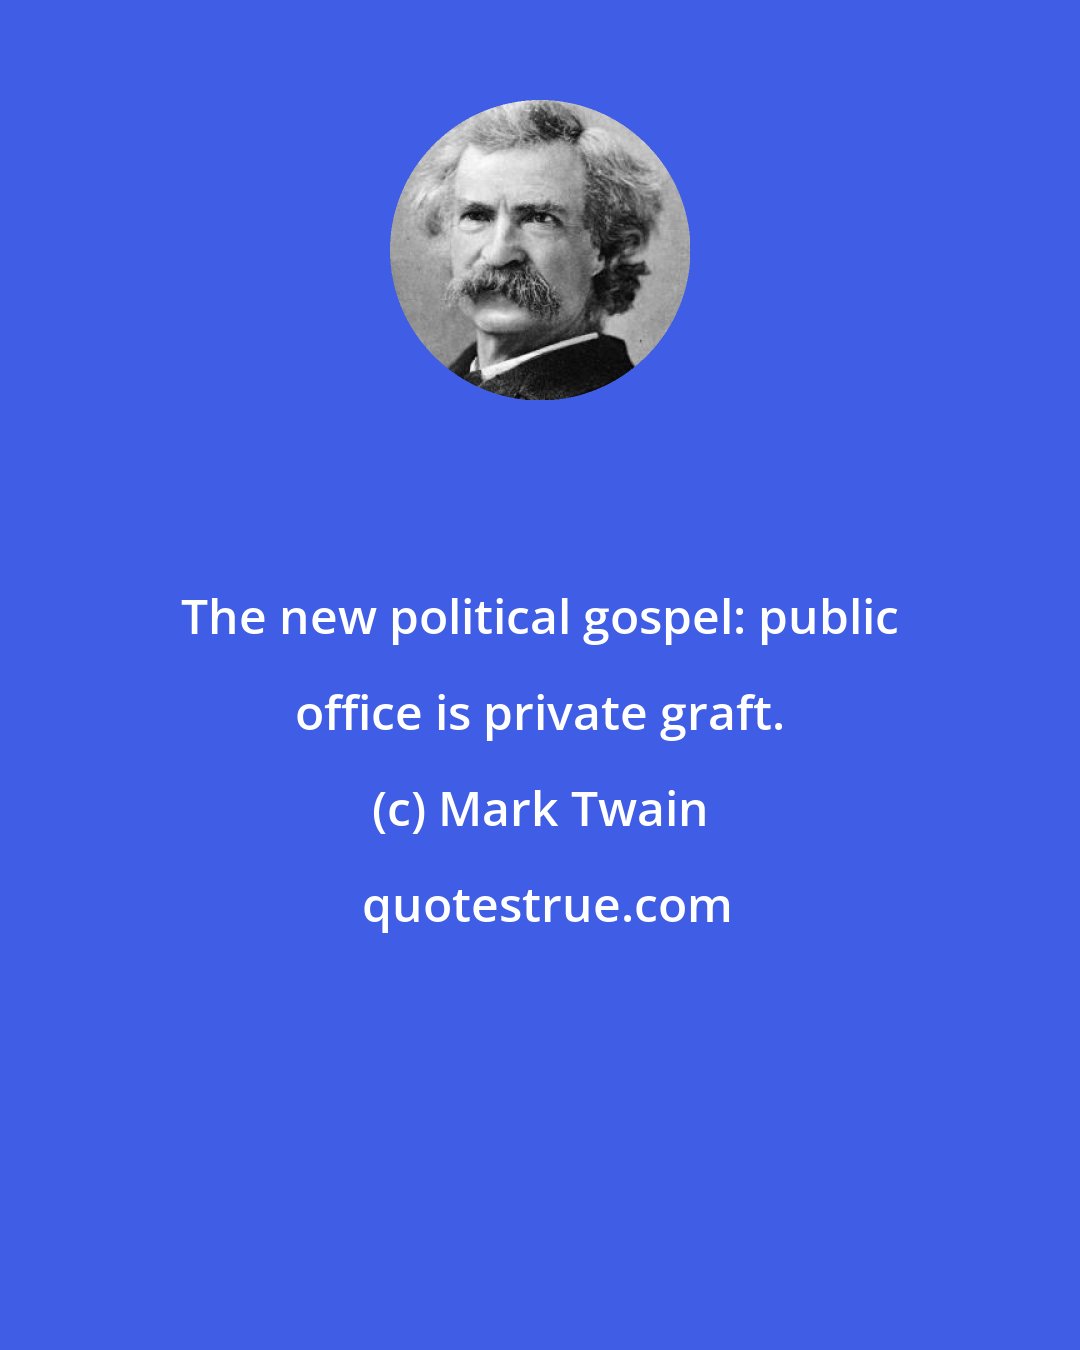 Mark Twain: The new political gospel: public office is private graft.